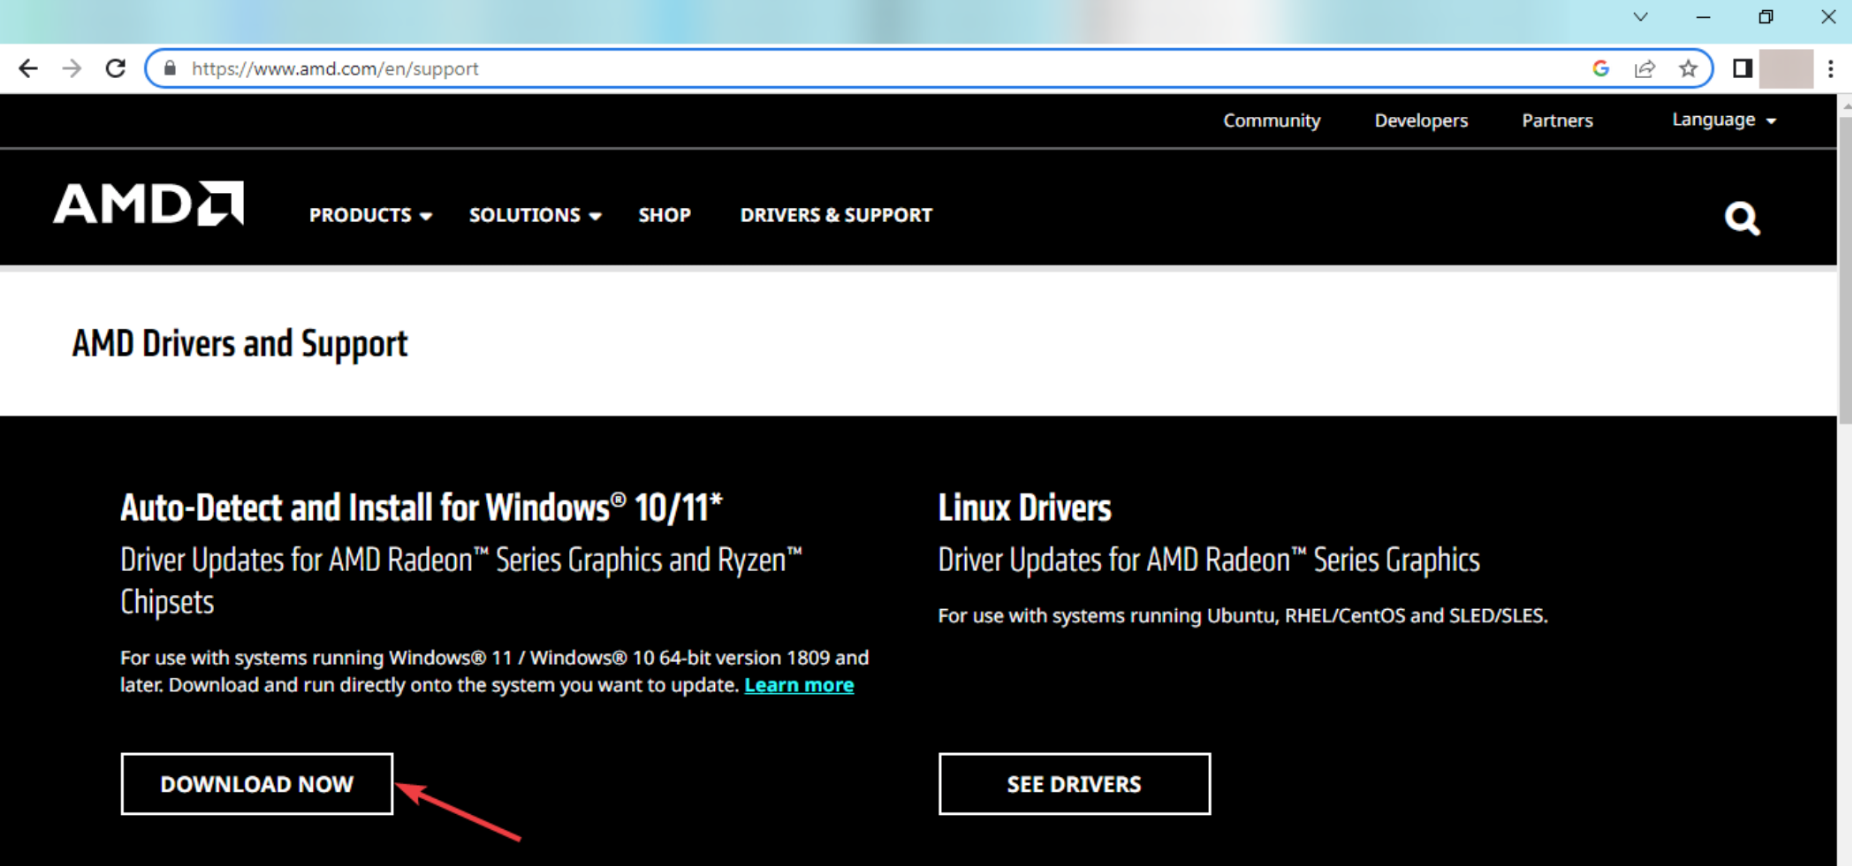 Get Drivers with AMD Auto-Detect and Install Tool